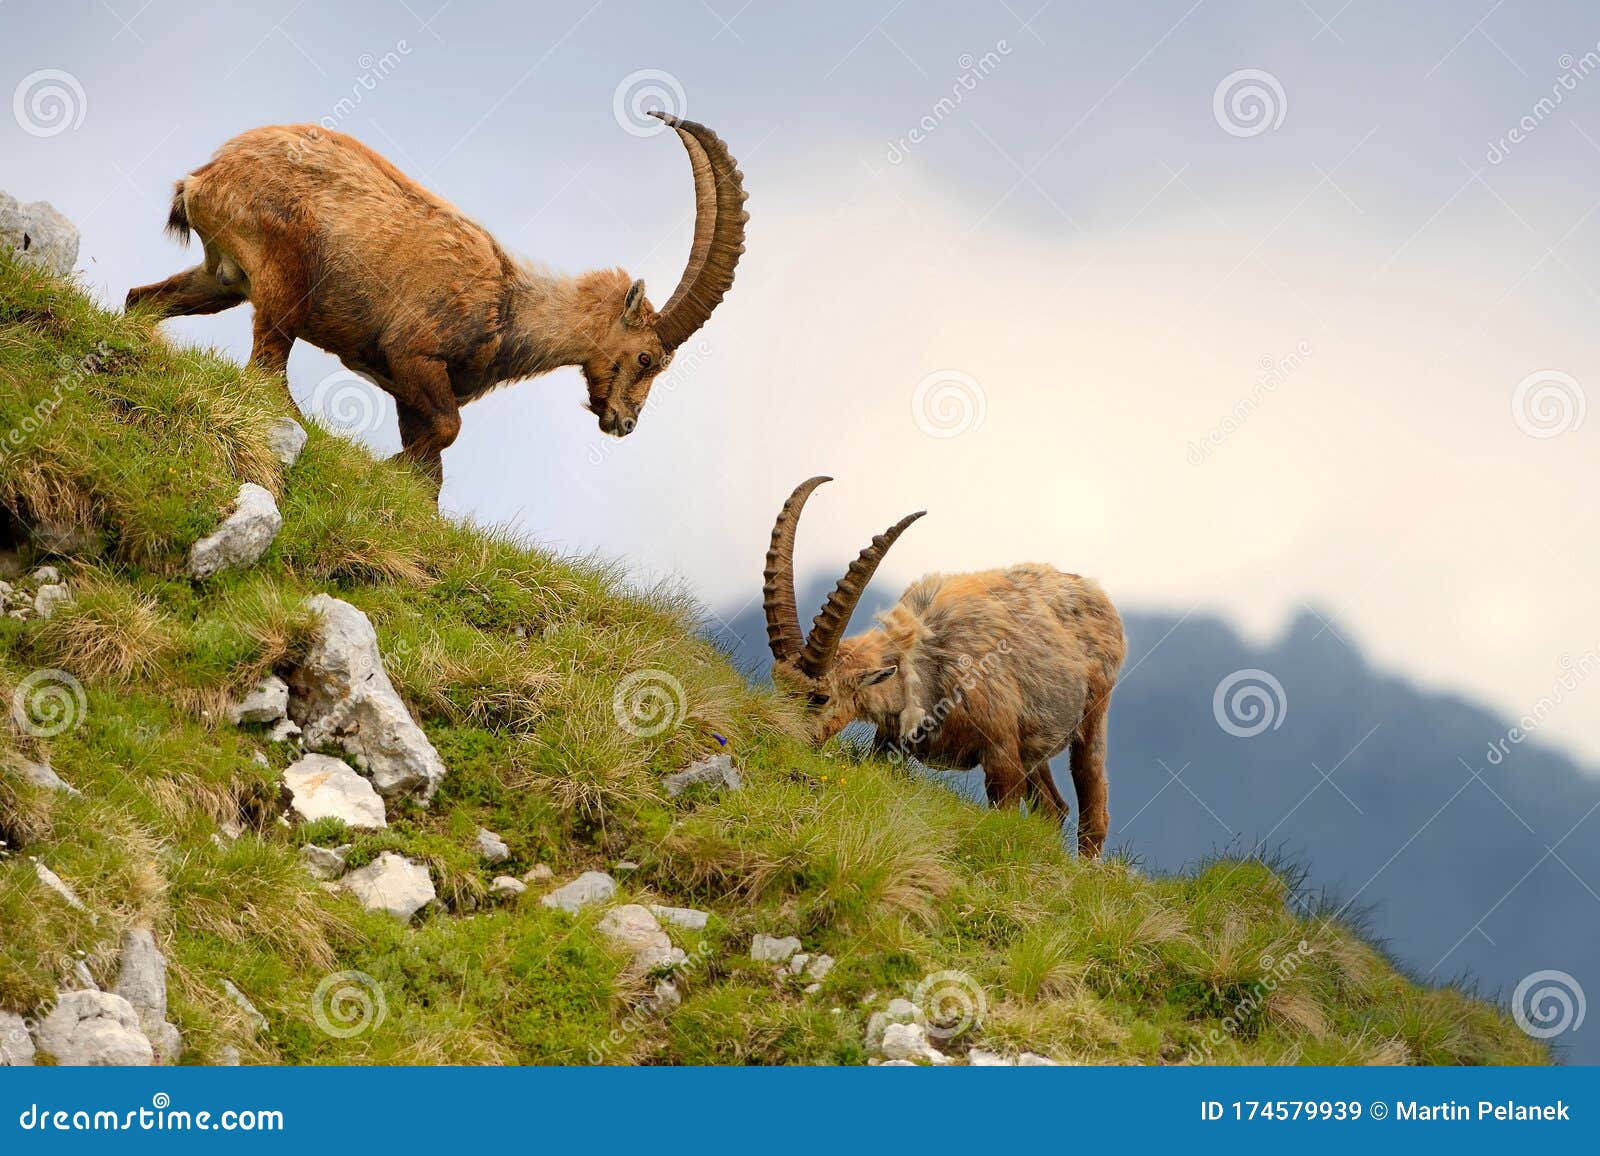 alpine ibex - capra ibex pasturing and mating and dueling in slovenian alps. typical horned animal of the high mountains